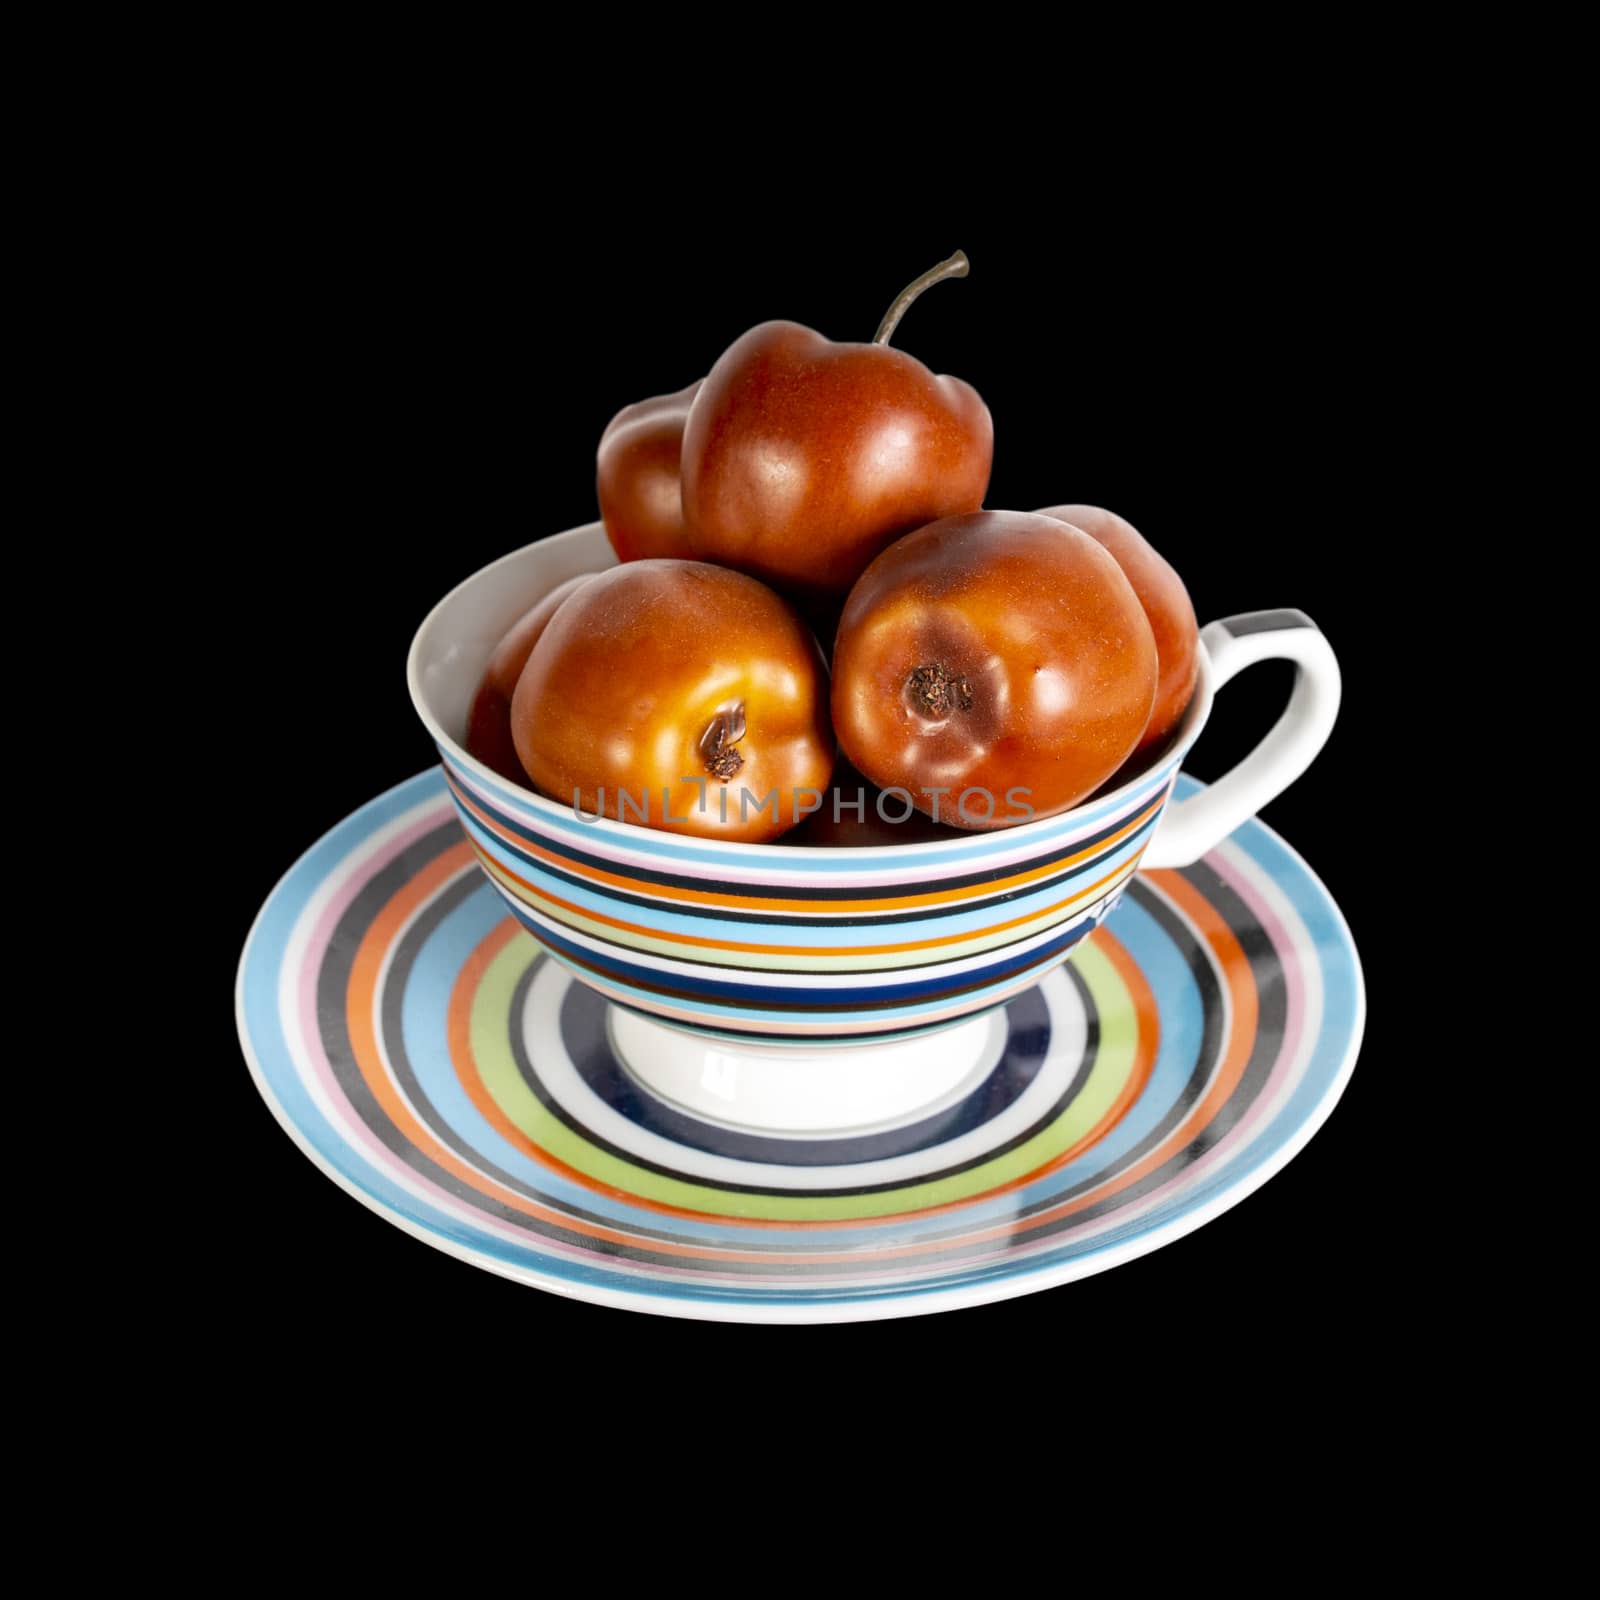 apples are beautifully stacked in a multi-colored cup on a saucer. by 977_ReX_977